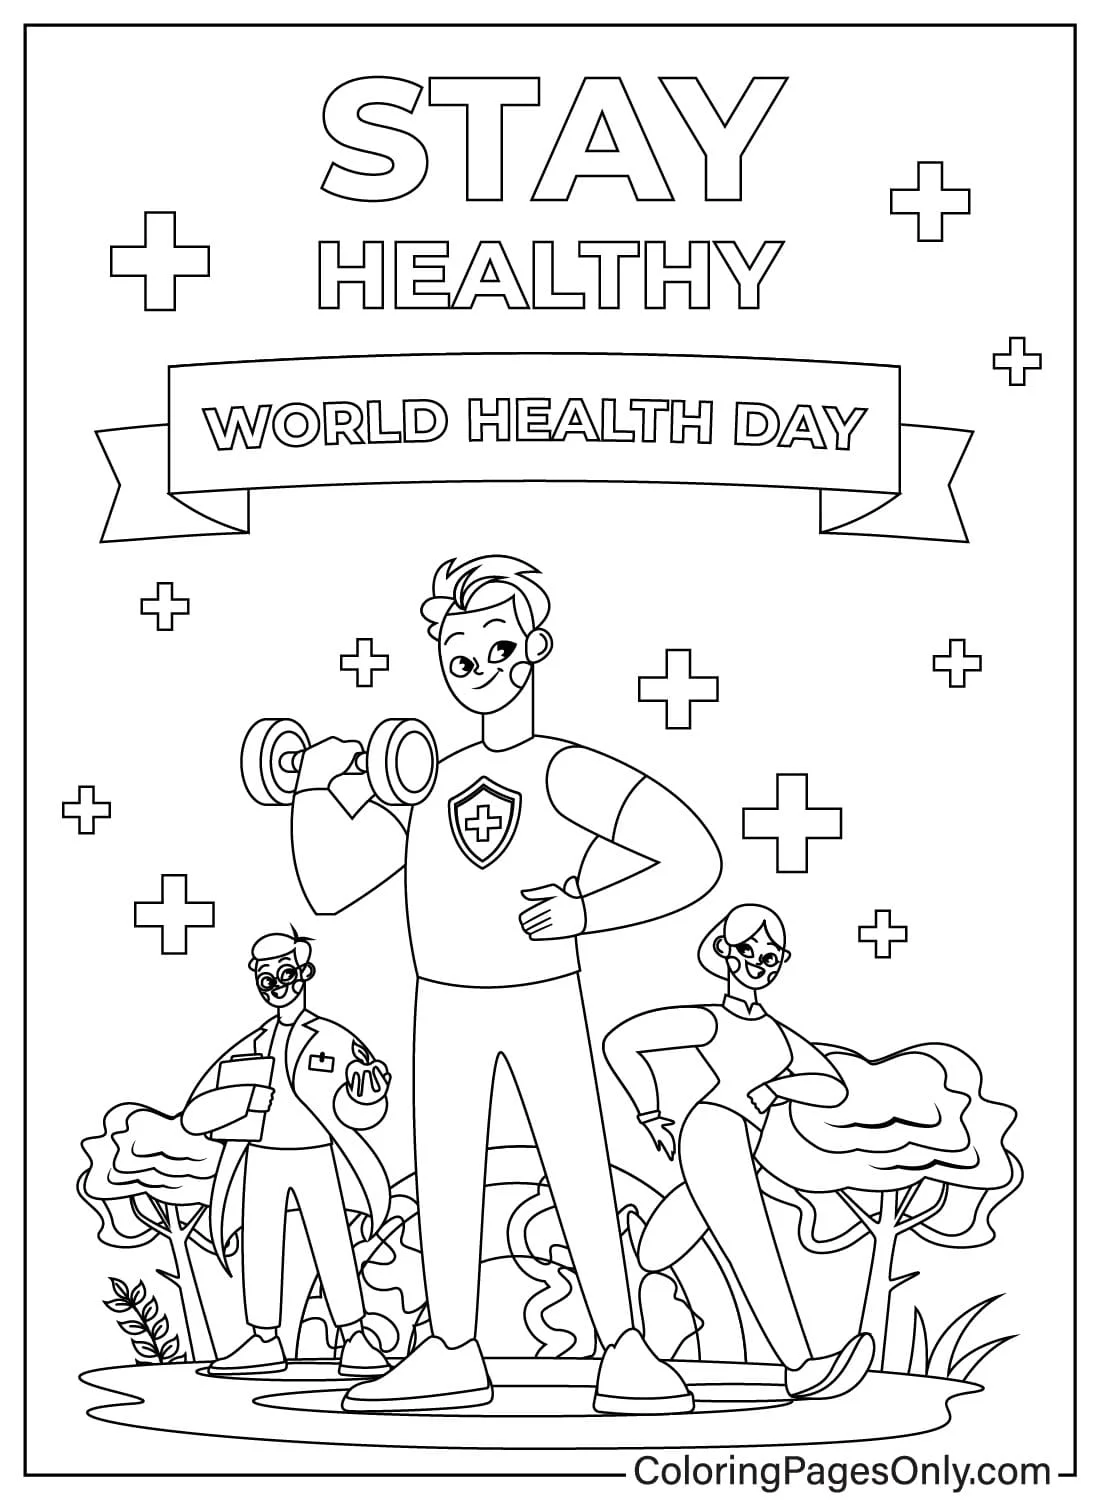 World Health Day Coloring Page For Adults